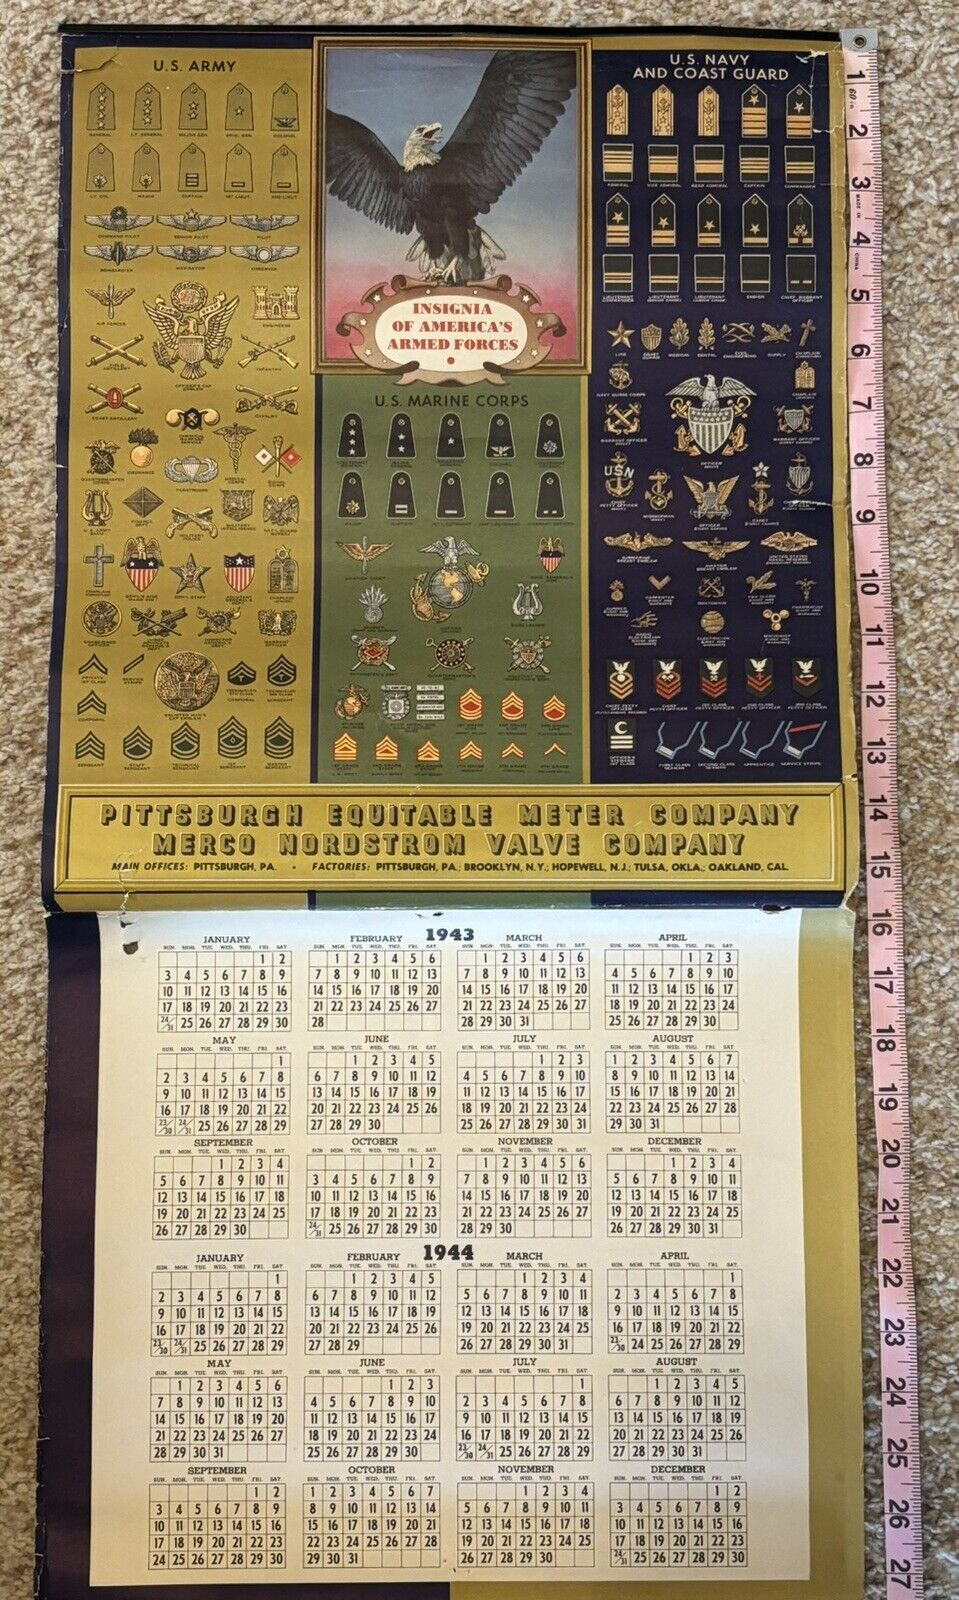 WWII 43 Insignia Calendar Pittsburgh Equitable Meter & Merco Nordstrom Valve Co.